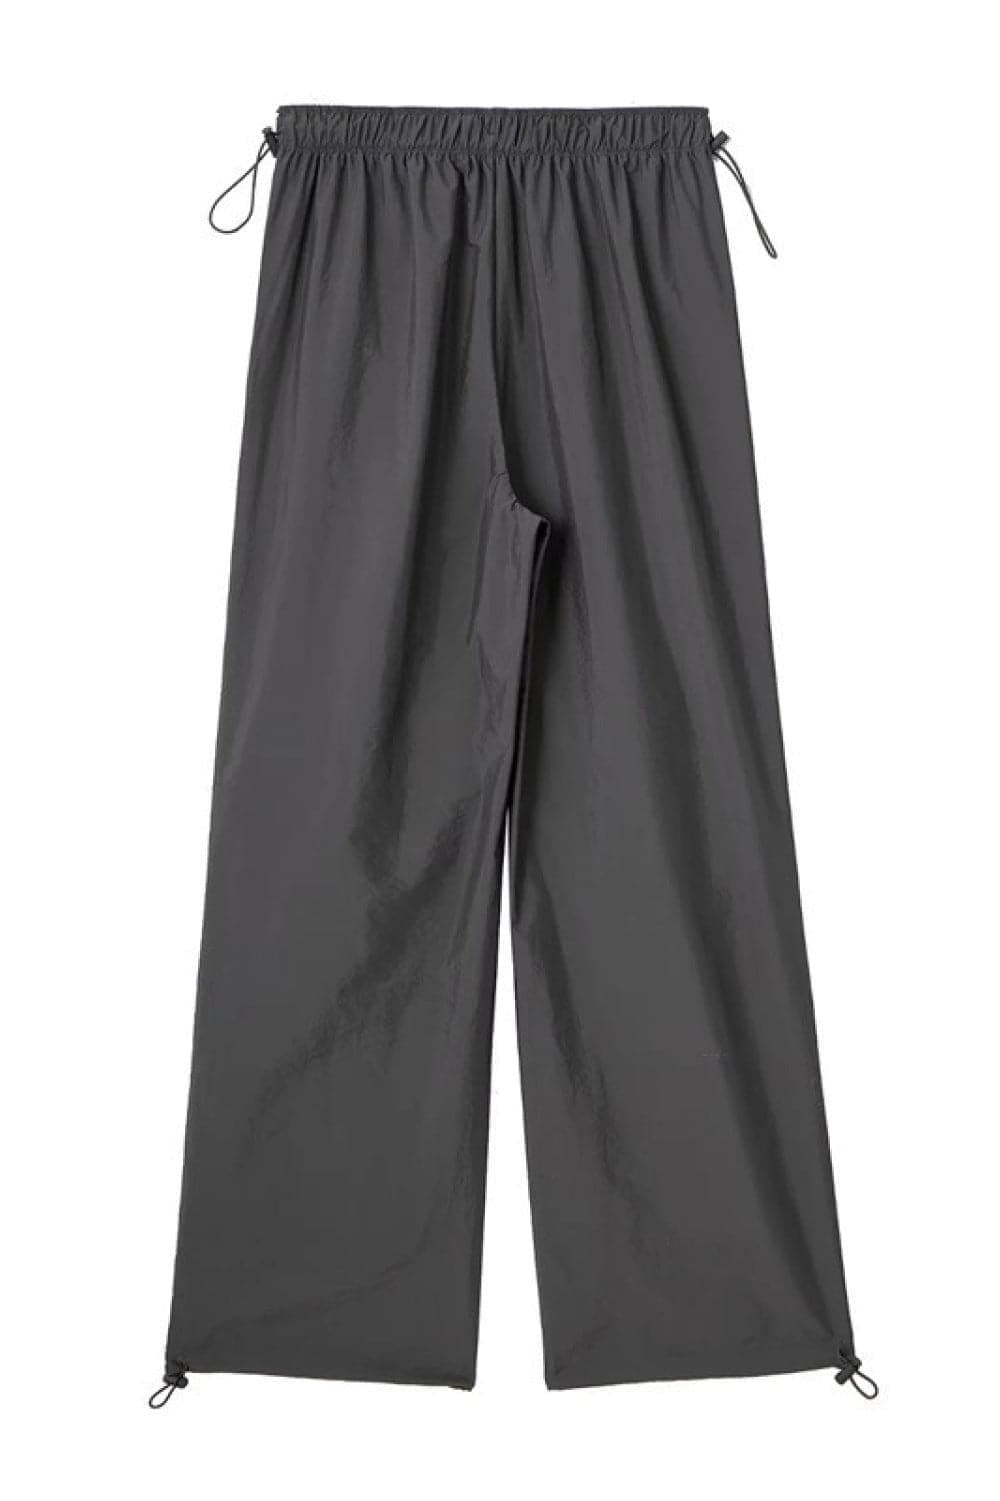 Drawstring Waist Pants with Pockets, 8 Colors - SwagglyLife Home & Fashion